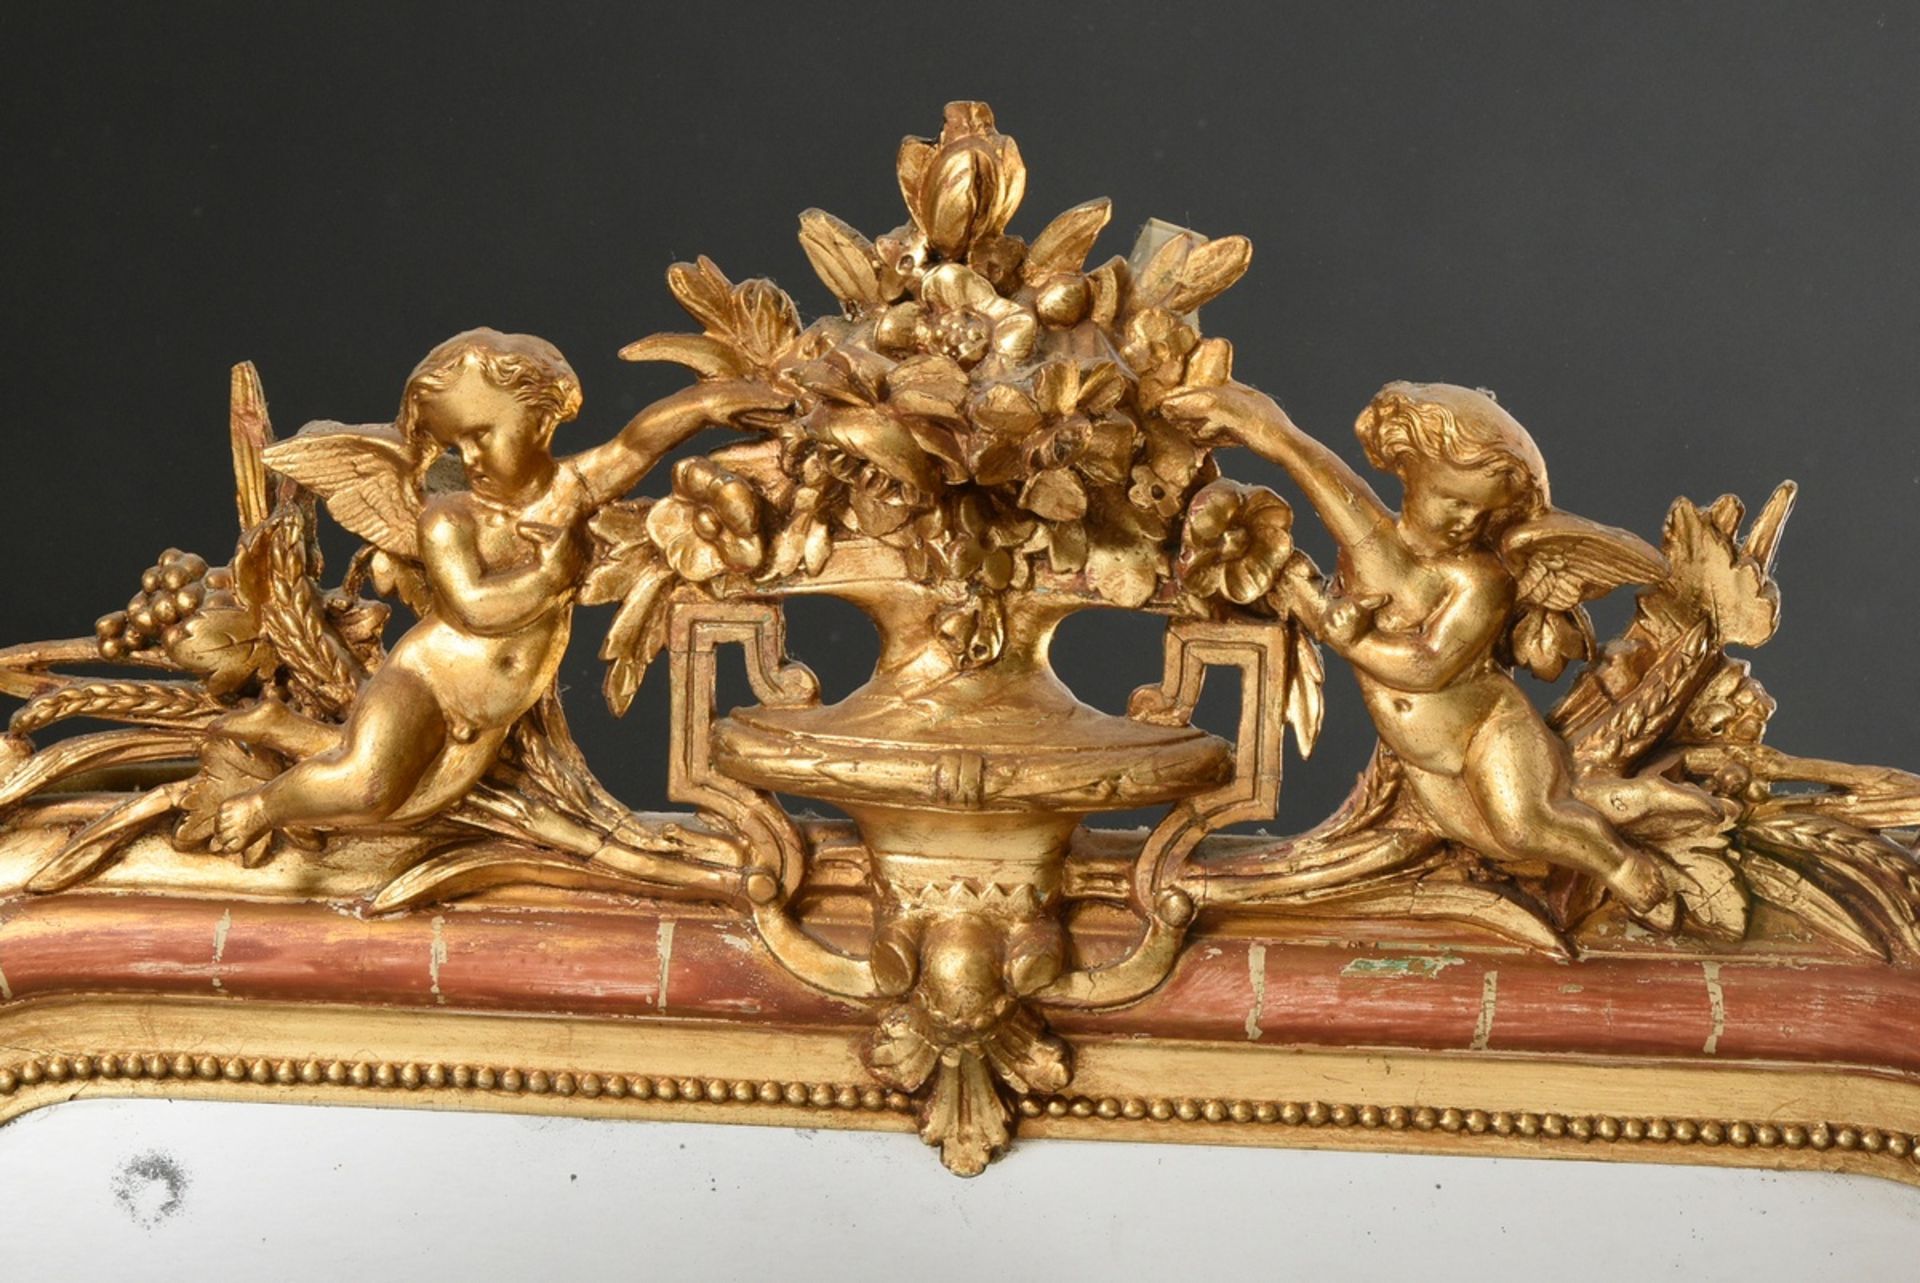 French fireplace mirror with figural decoration "Putti with vase", stucco gilded over bolus ground, - Image 2 of 4